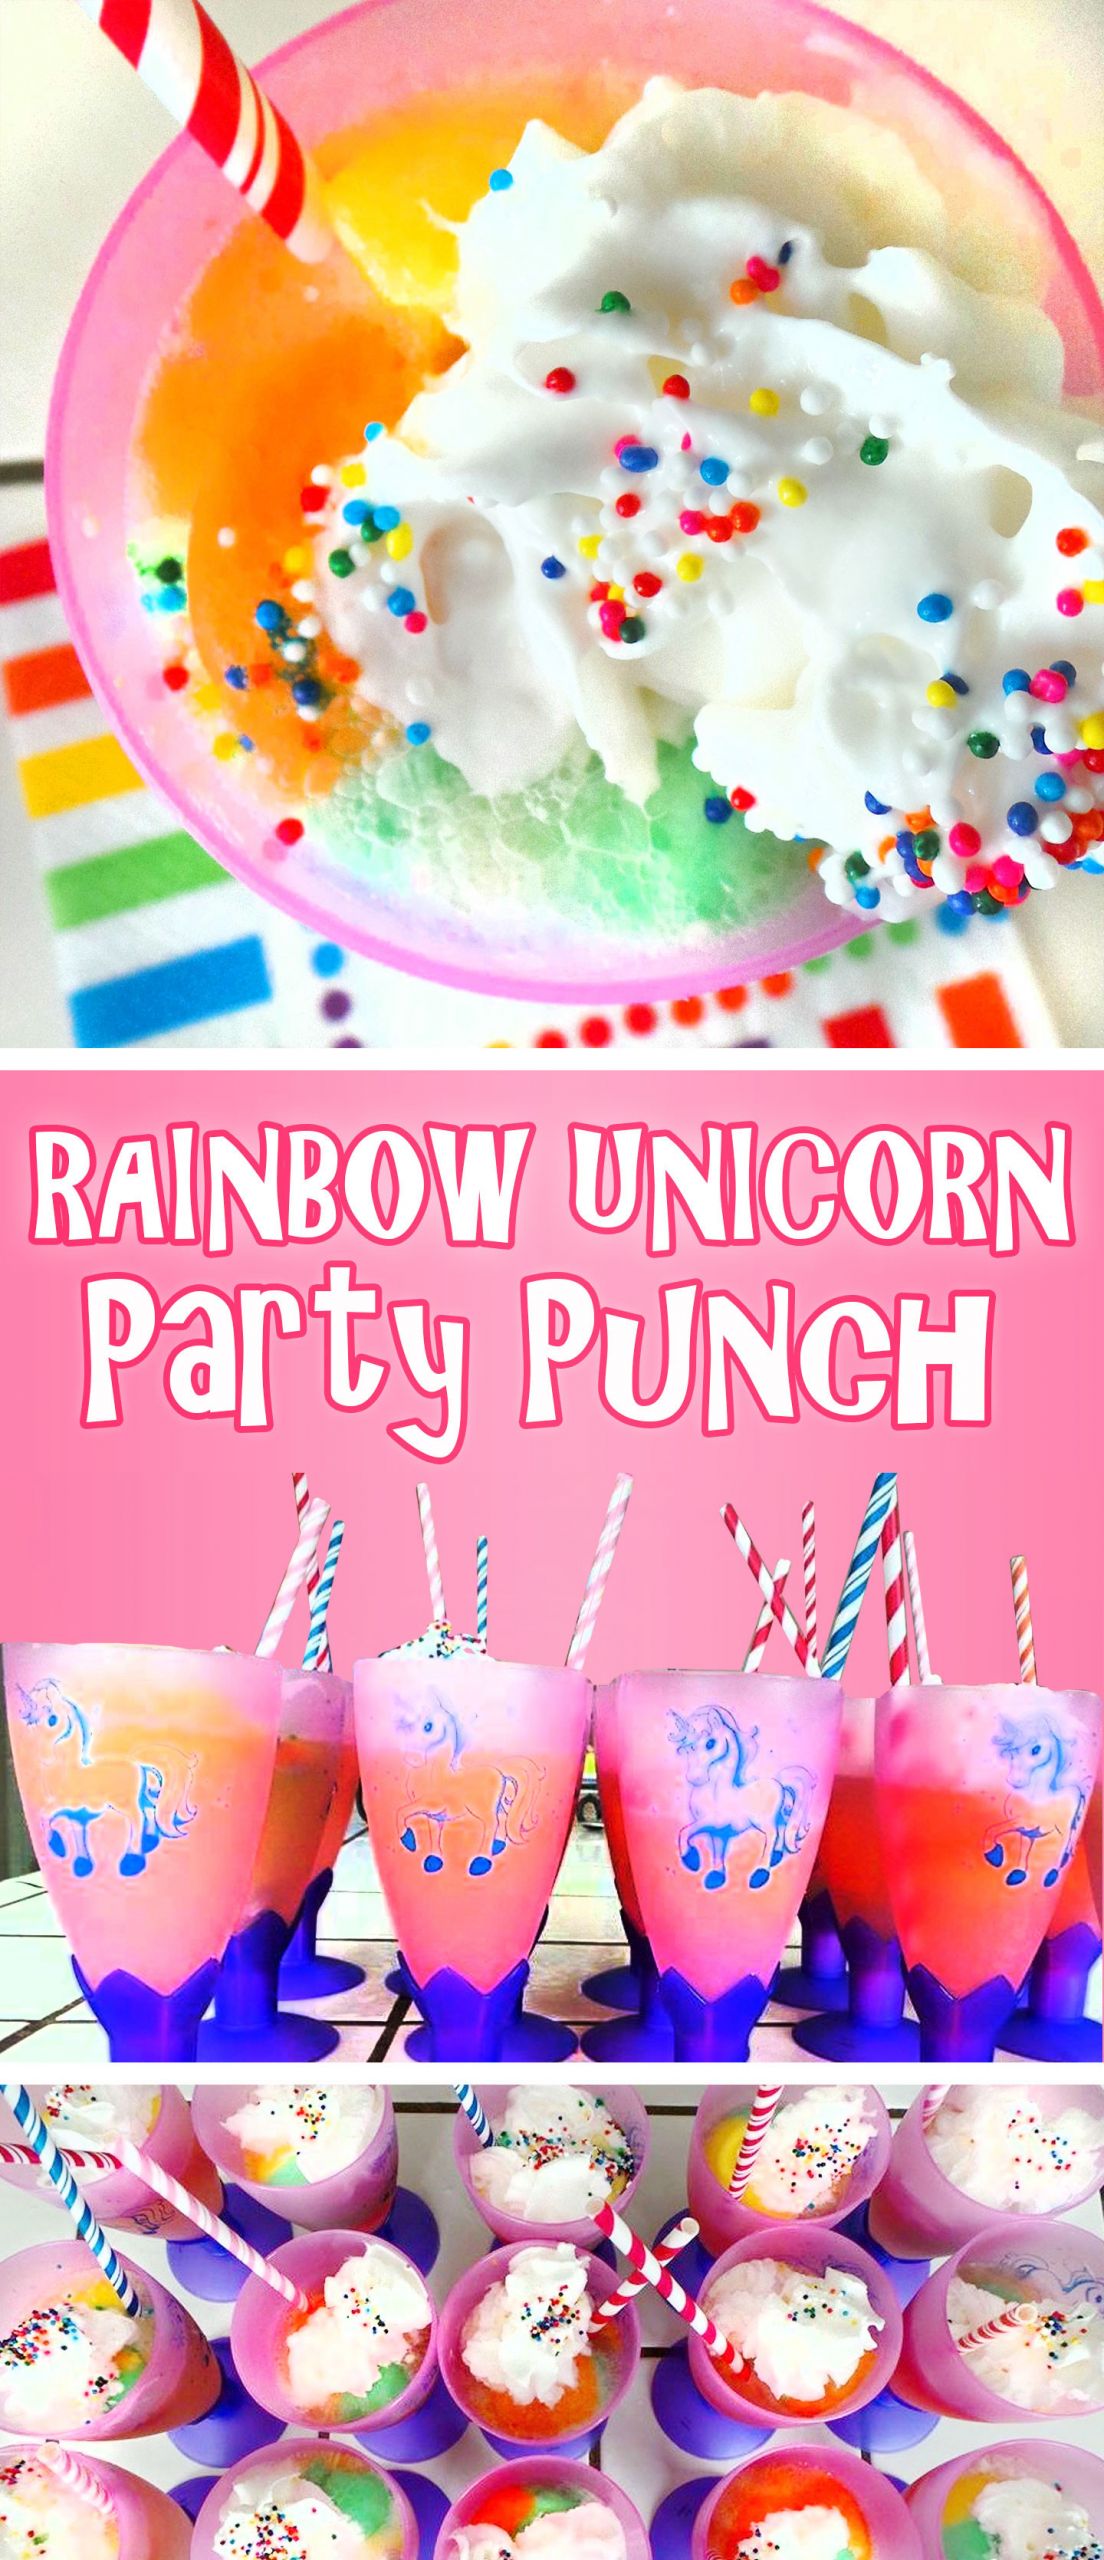 Unicorn Food Ideas For Party
 Rainbow Unicorn Party Punch